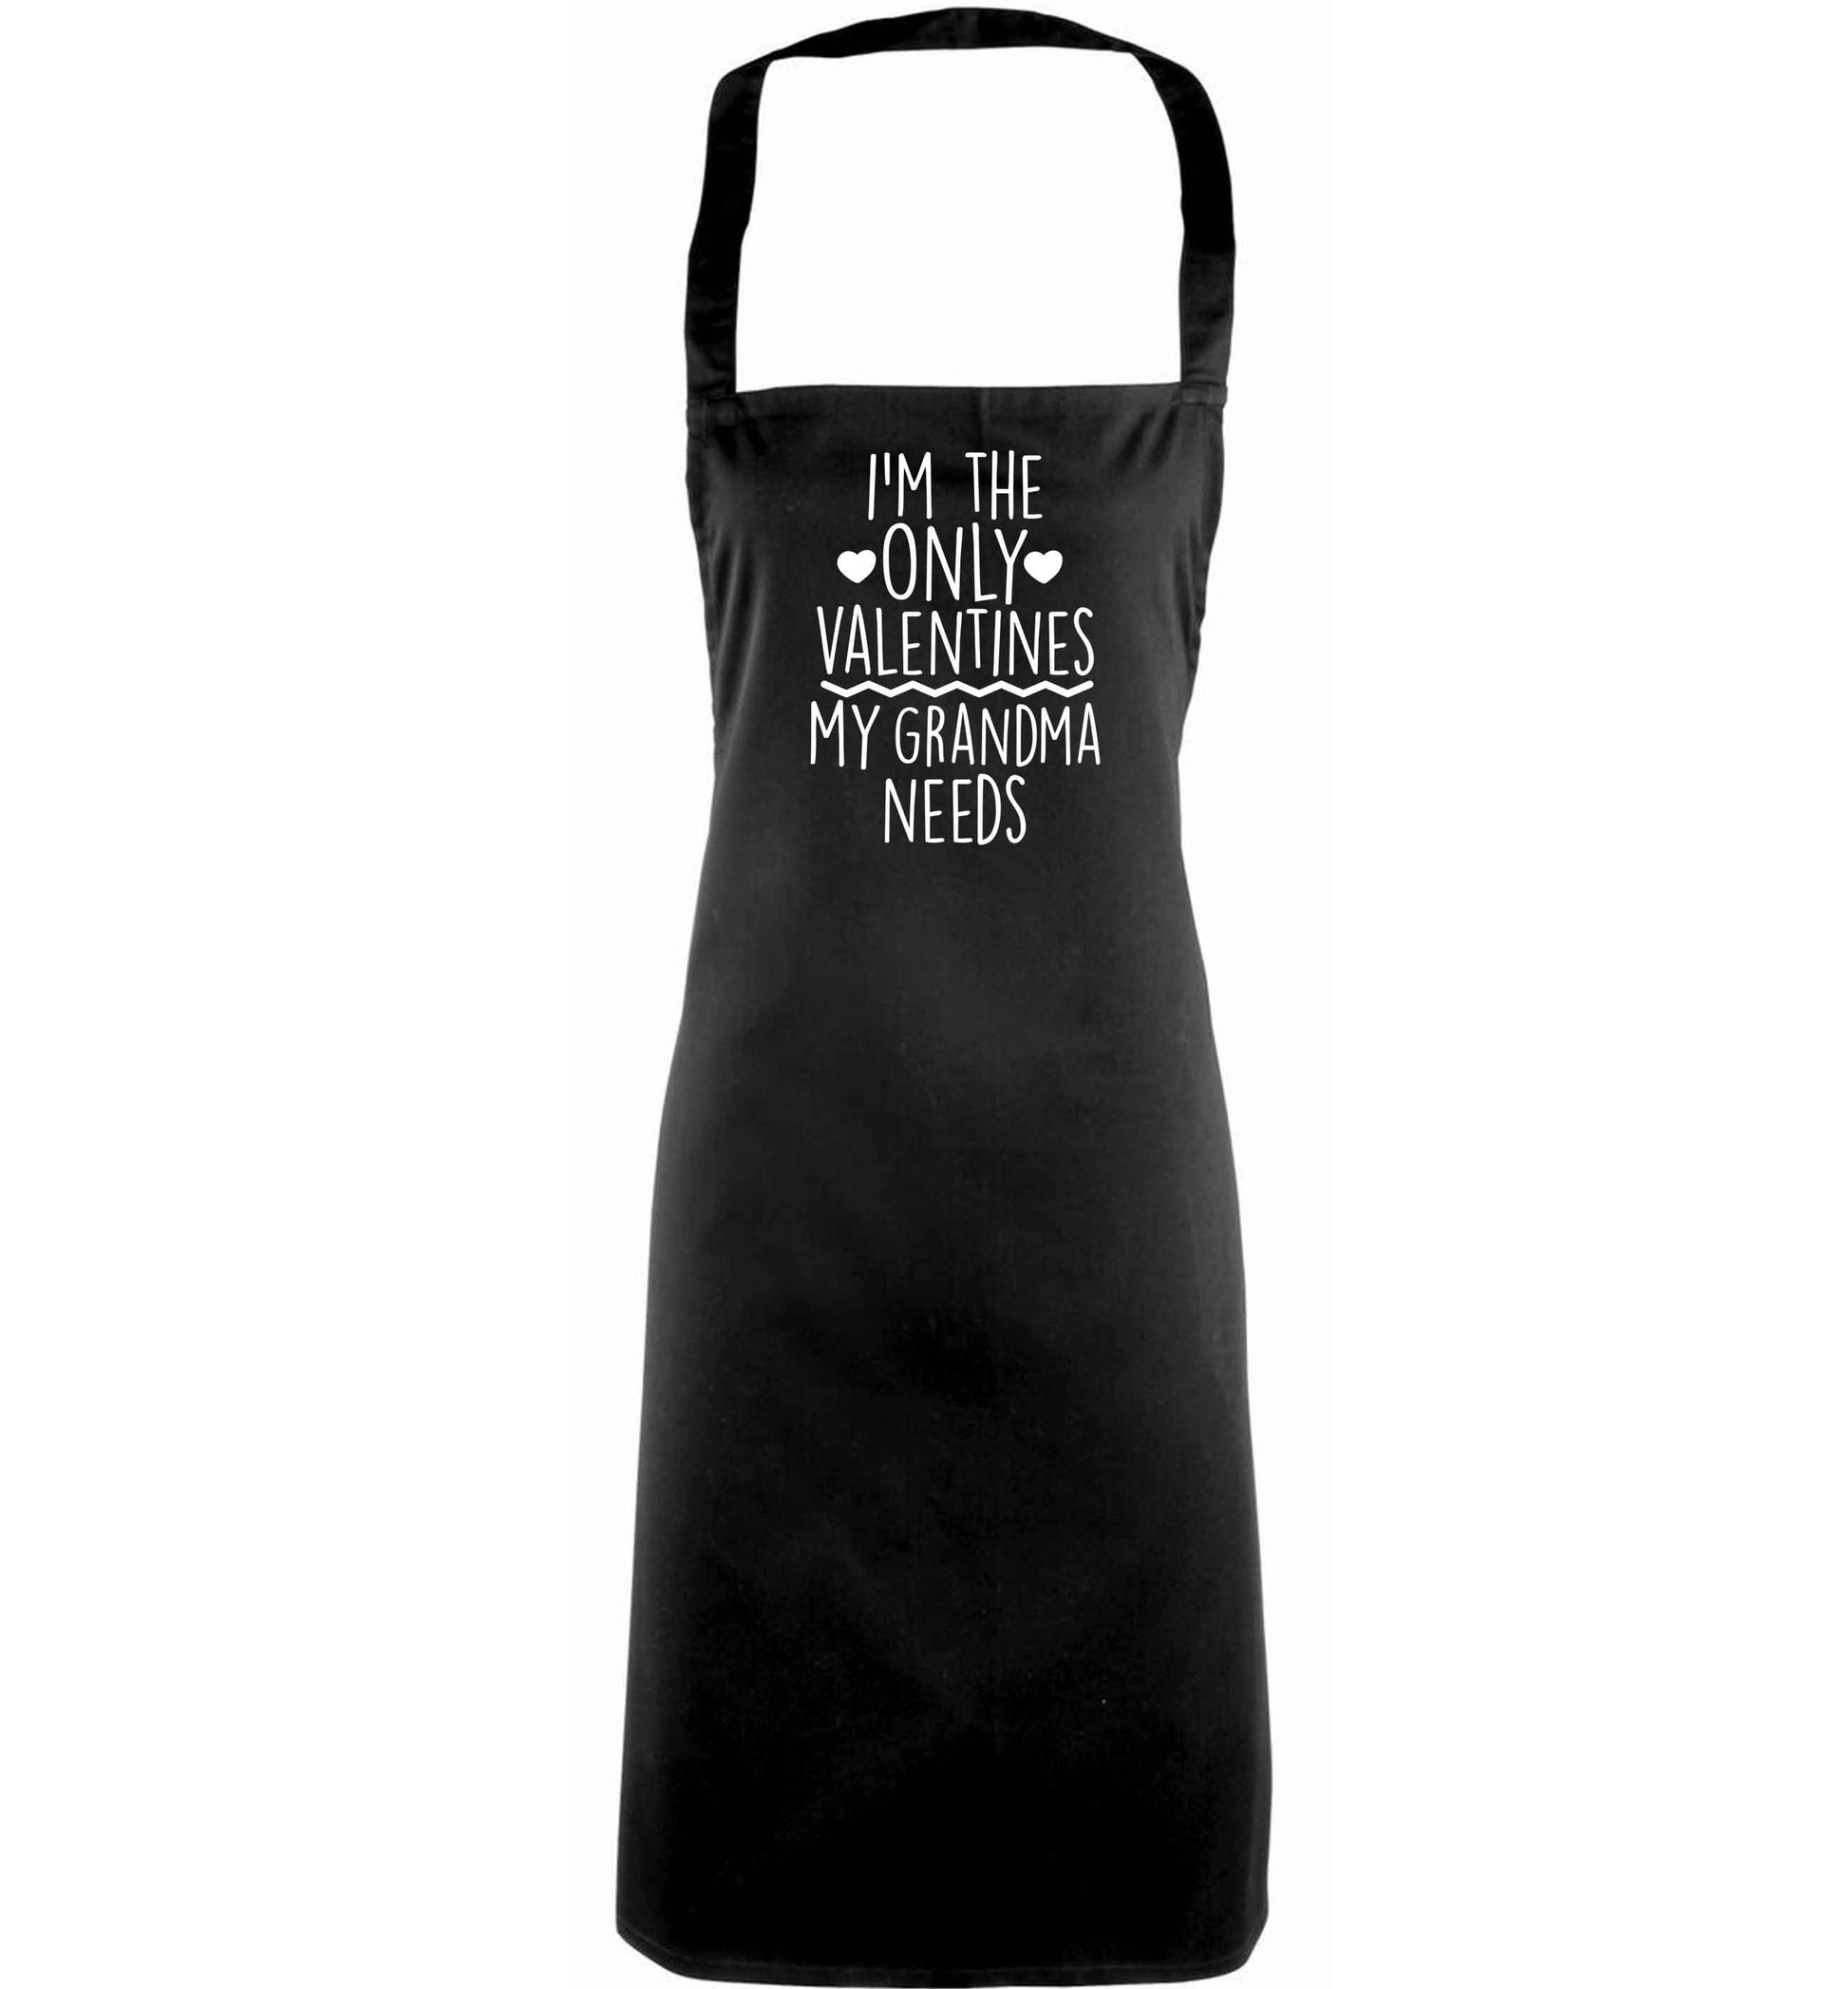 I'm the only valentines my grandma needs adults black apron